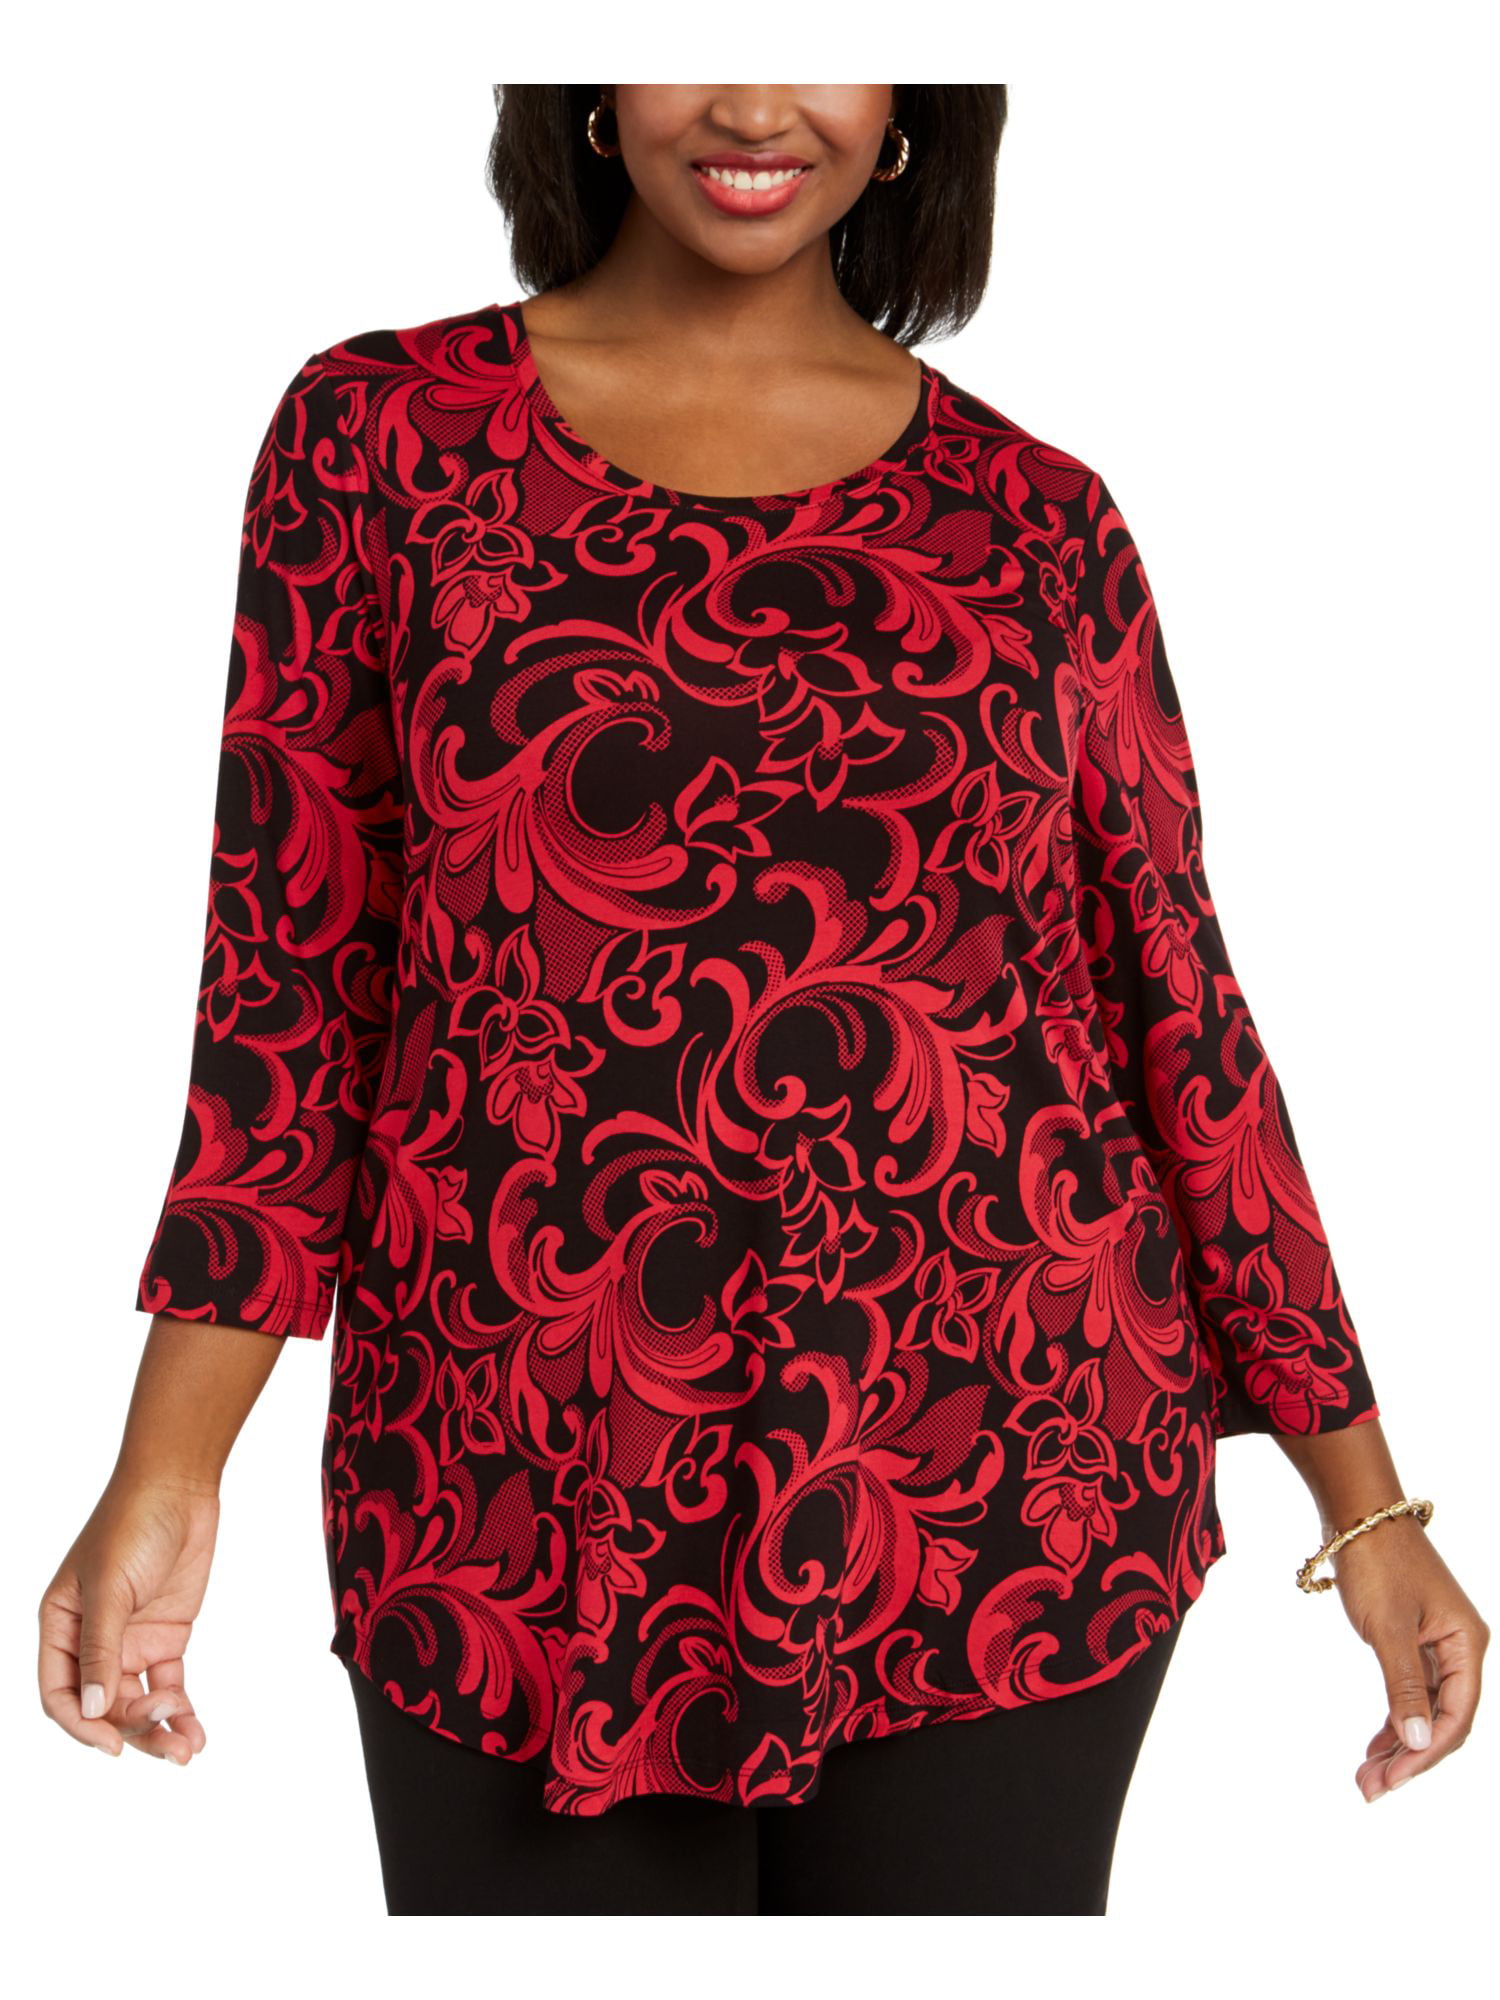 JM COLLECTION Womens Red Printed 3/4 Sleeve Jewel Neck Top Petites PP ...